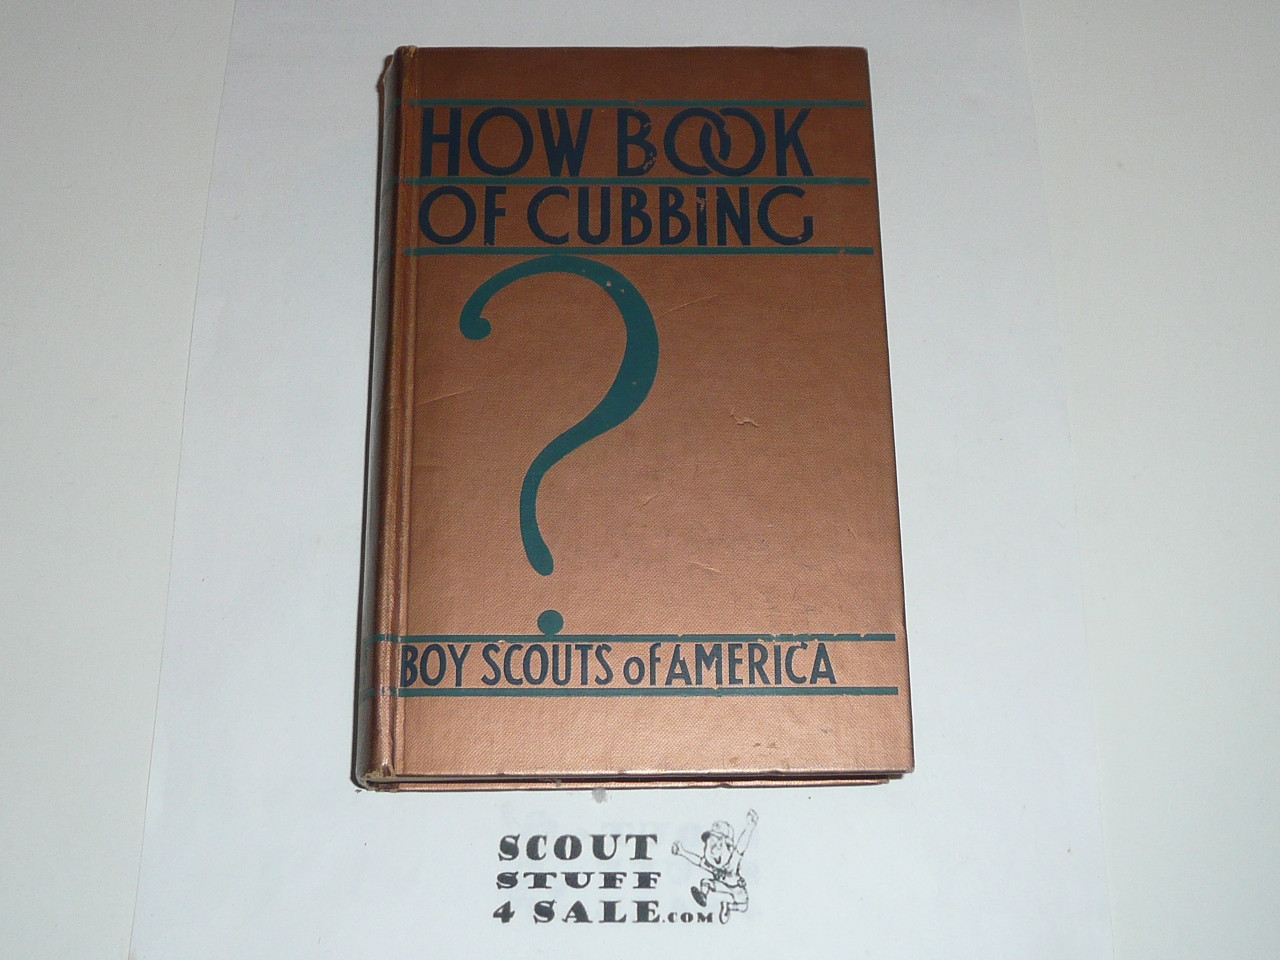 1942 How Book of Cubbing, Cub Scout, 2-42 Printing